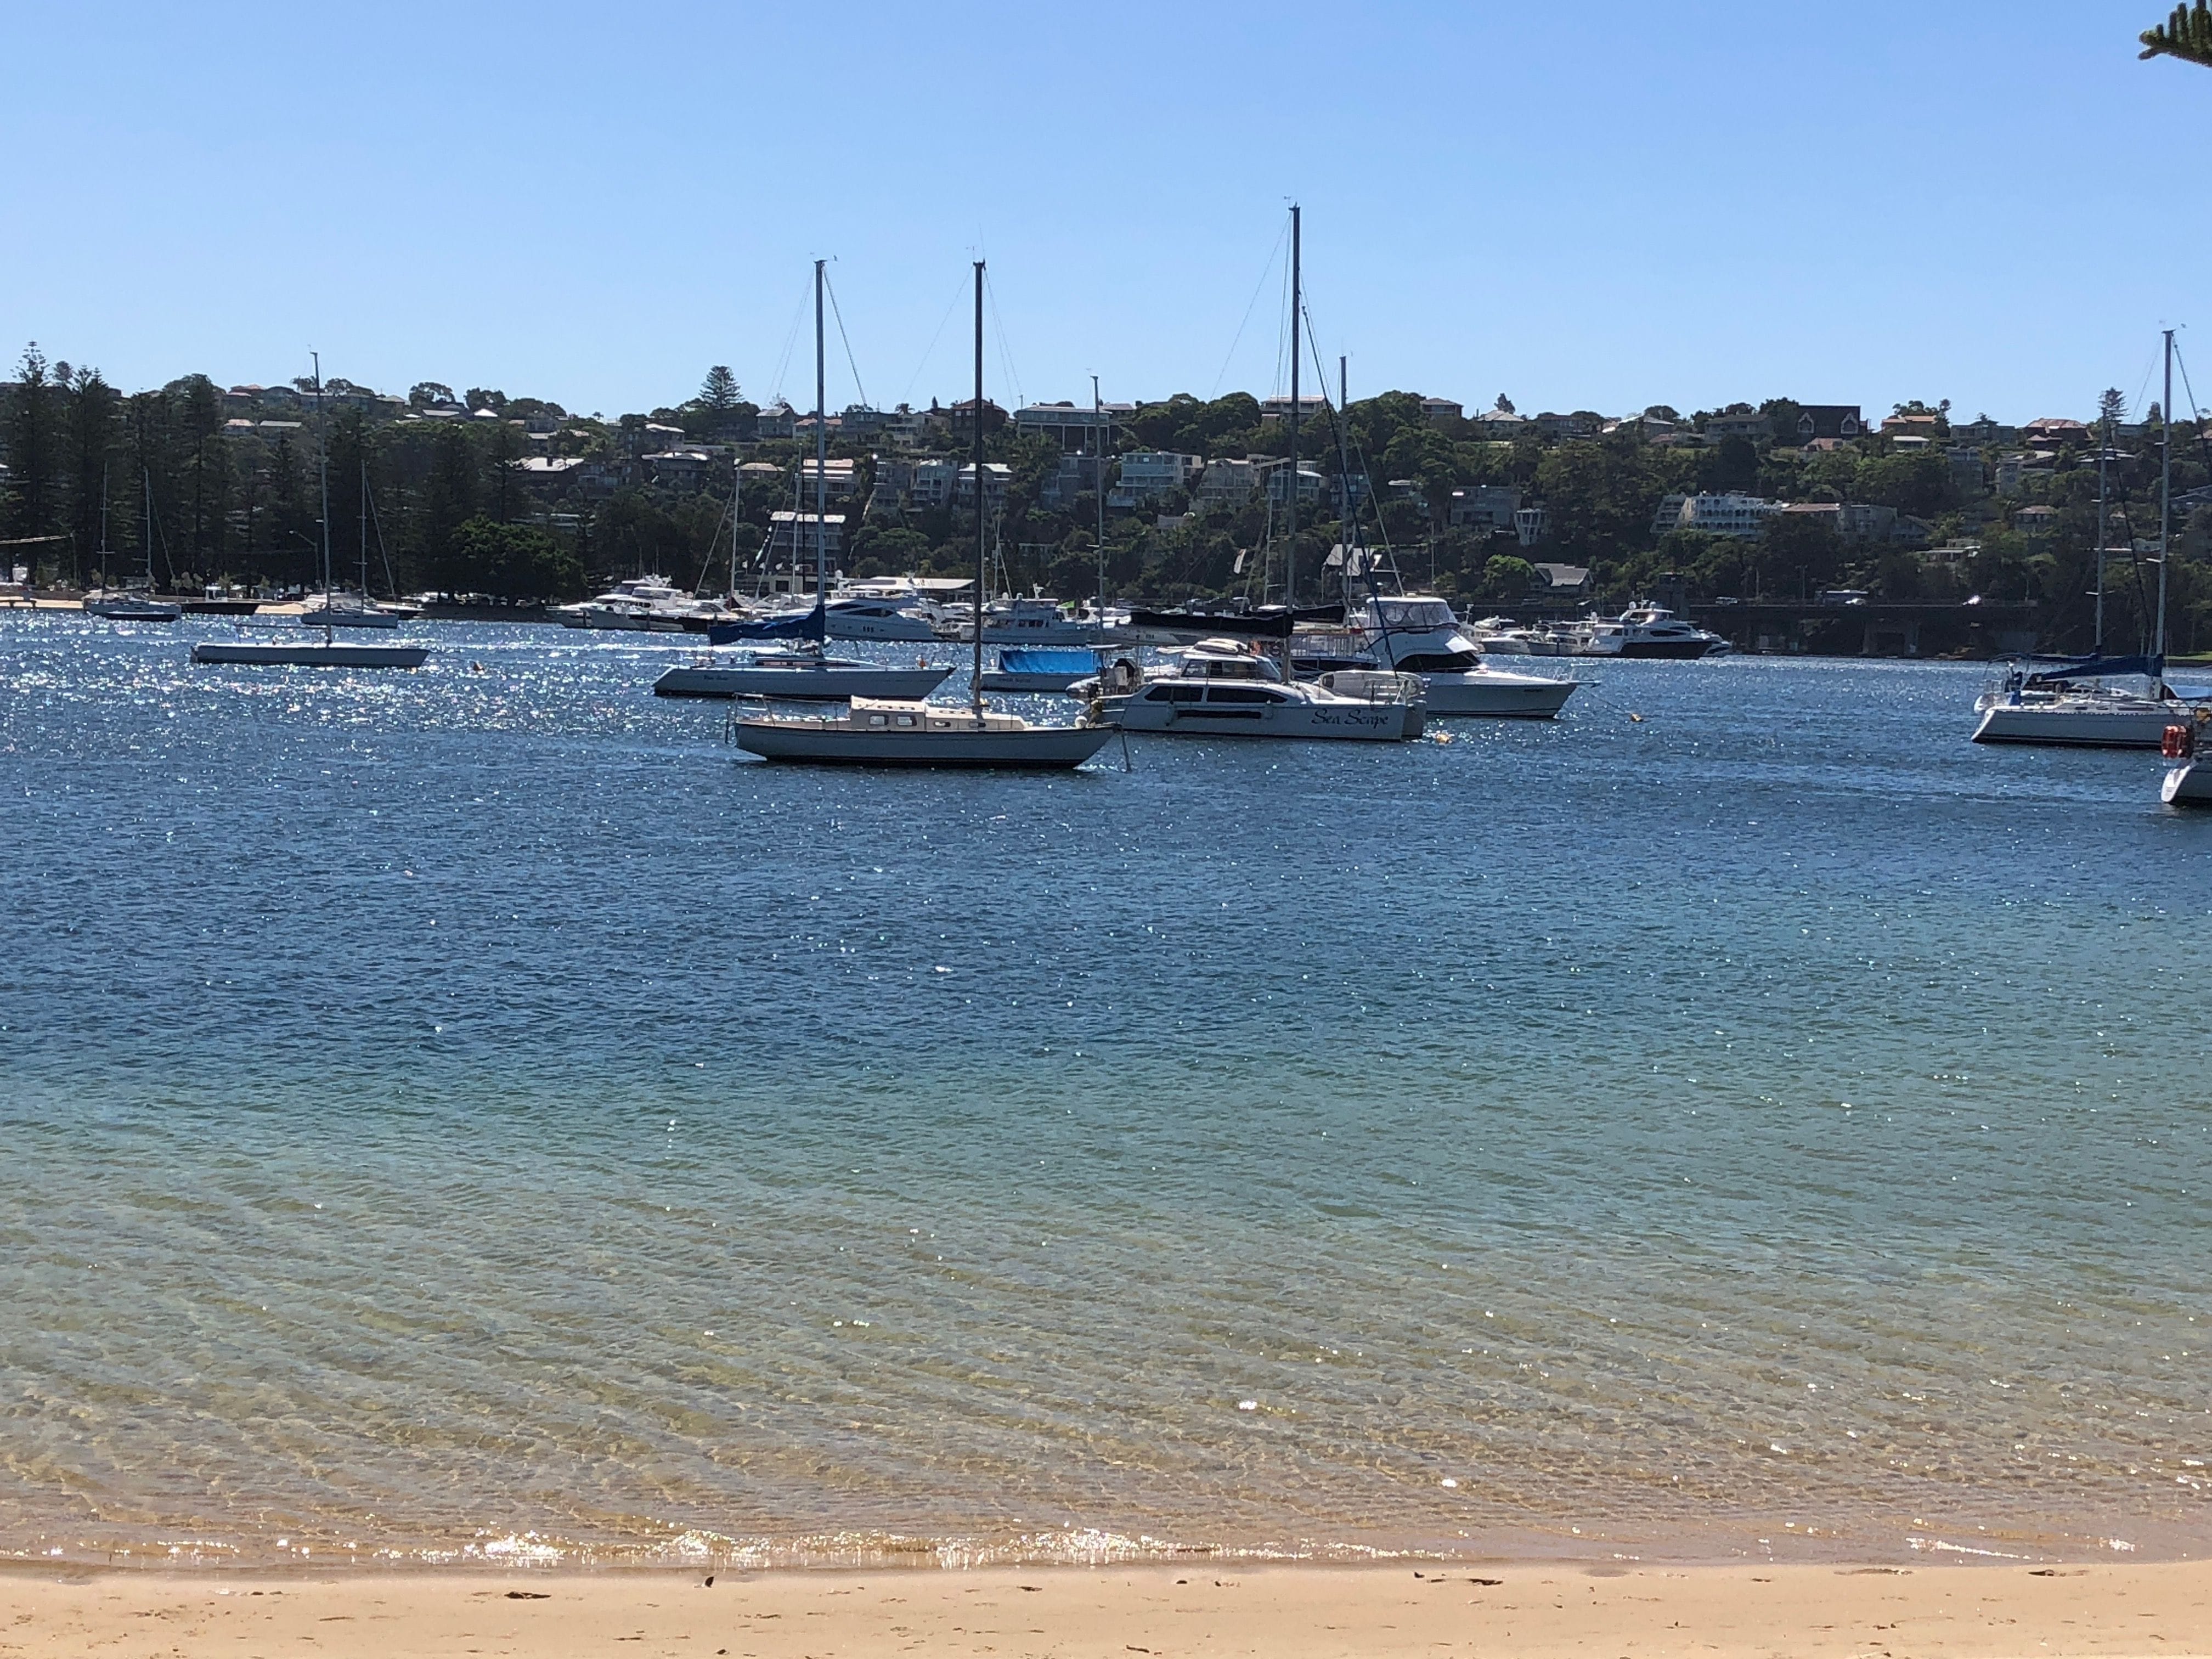 Northern Beaches Public Day Tour febuary 2019 Image -5c64964feed47